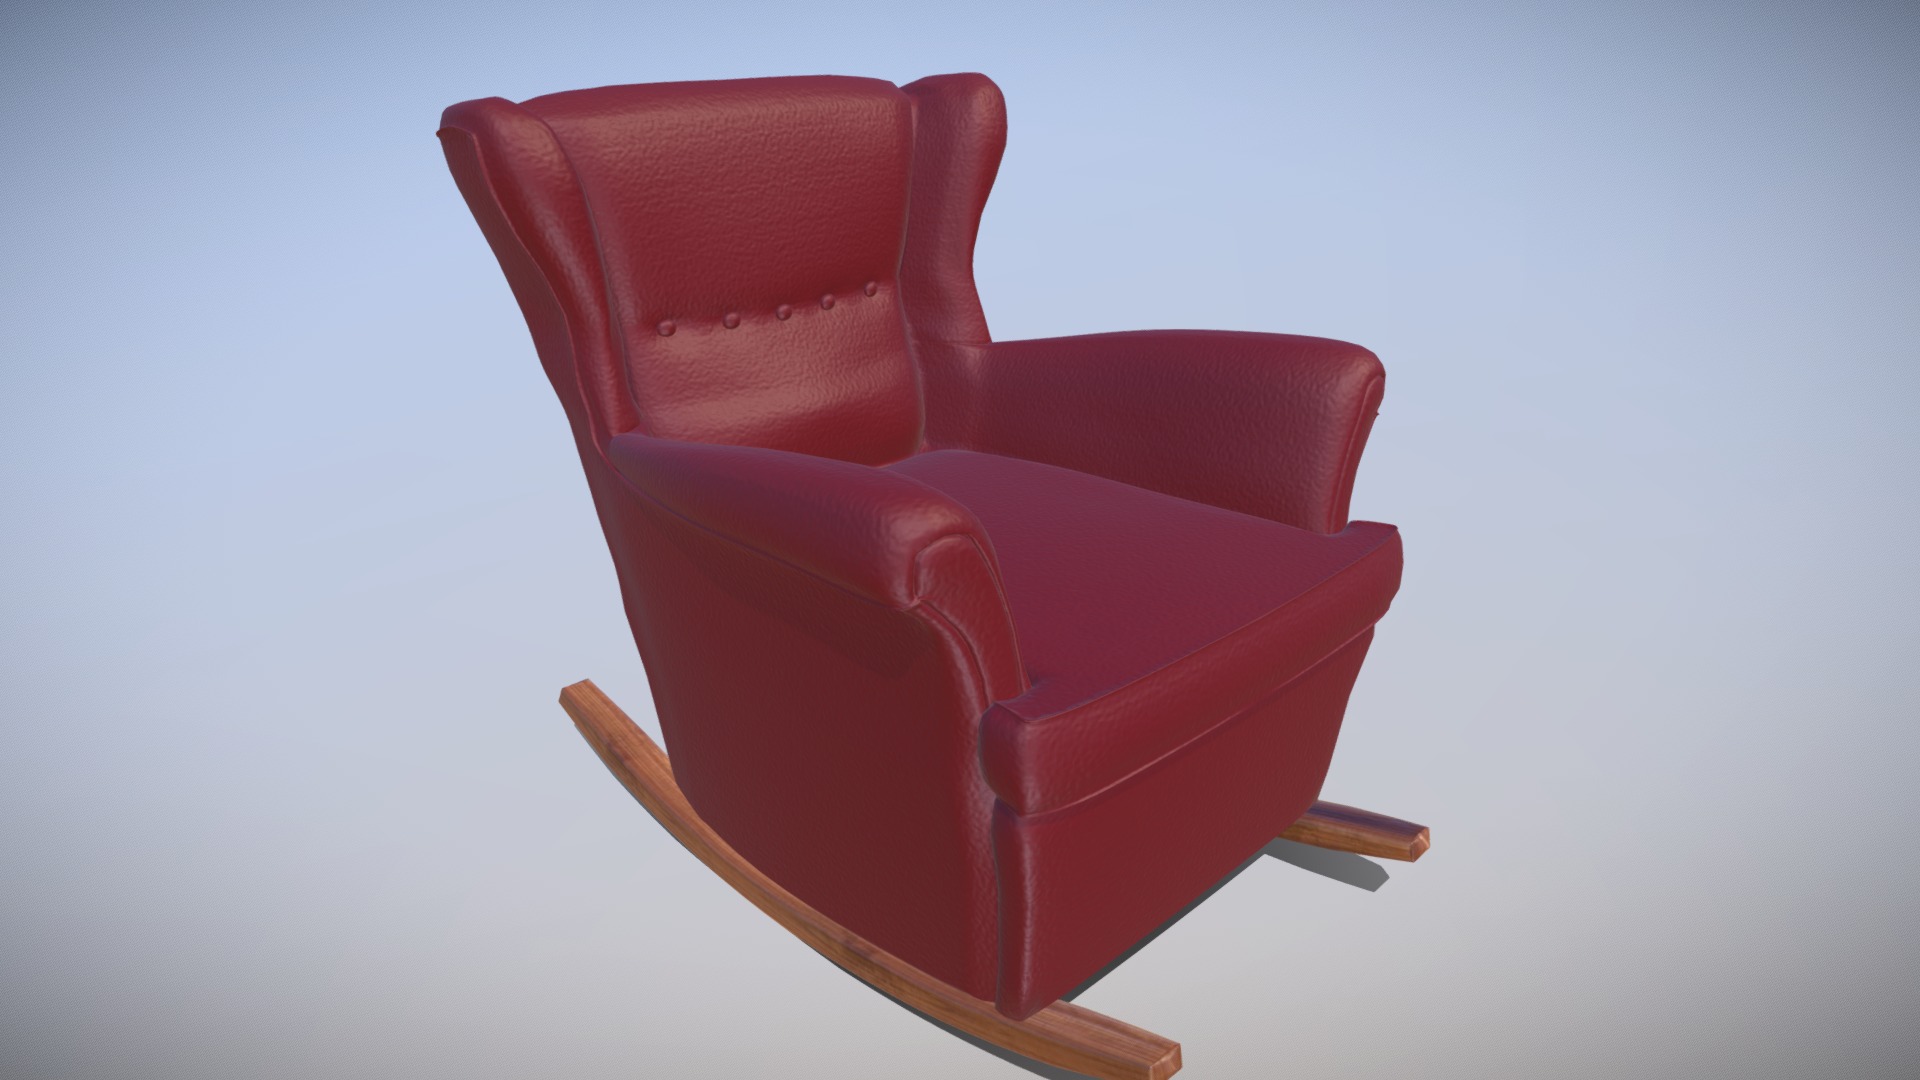 3D model Strandmon Mecedora - This is a 3D model of the Strandmon Mecedora. The 3D model is about a red chair on a stand.